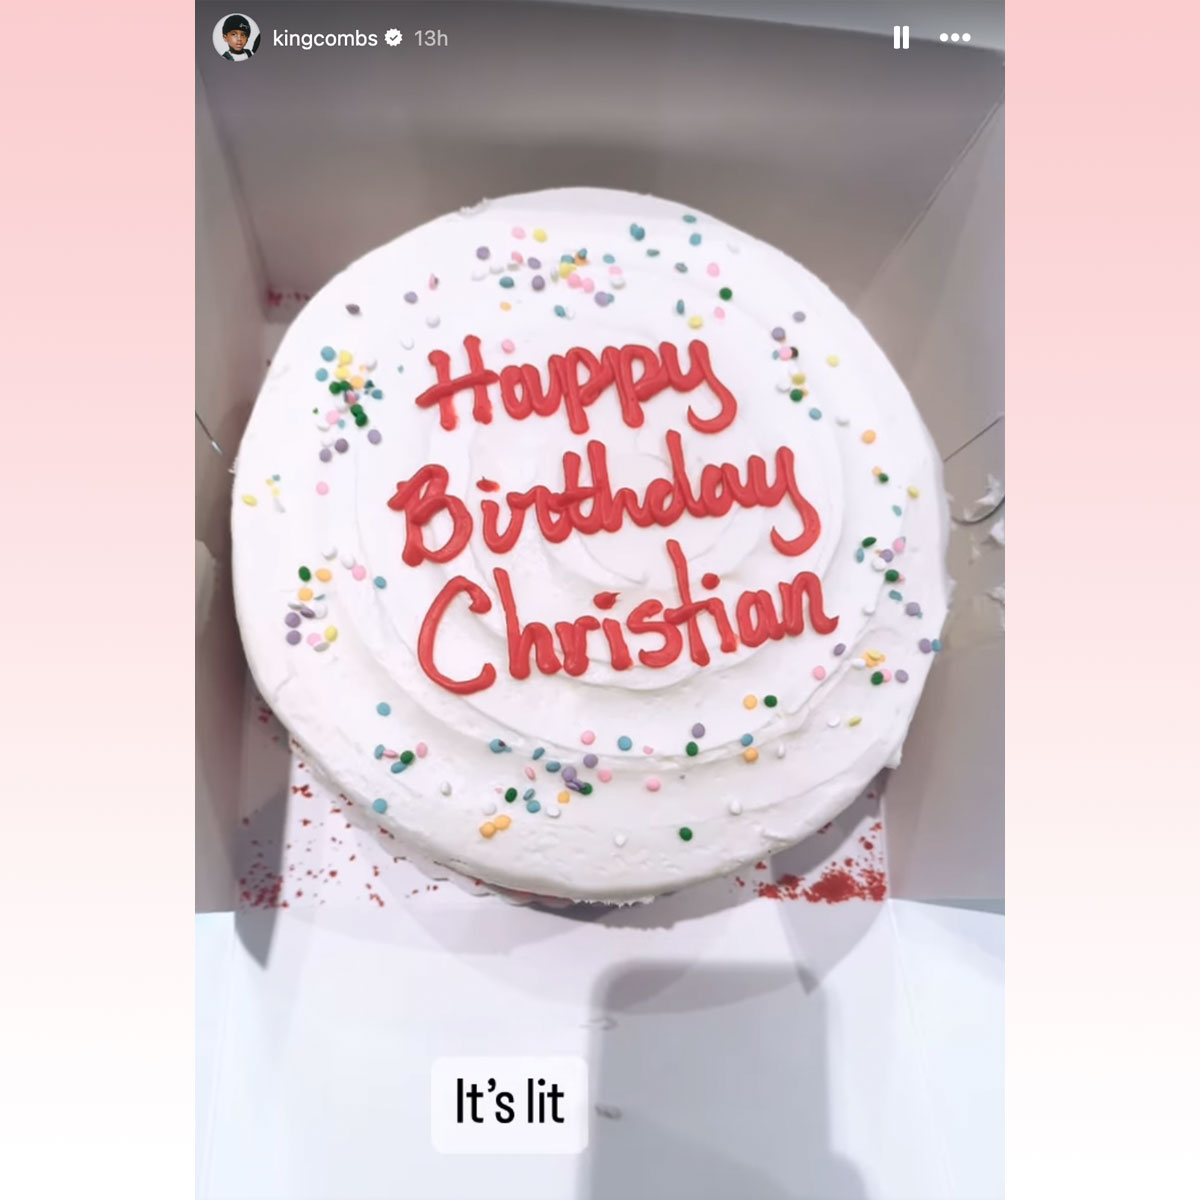 King Combs Shows Off Birthday Cake